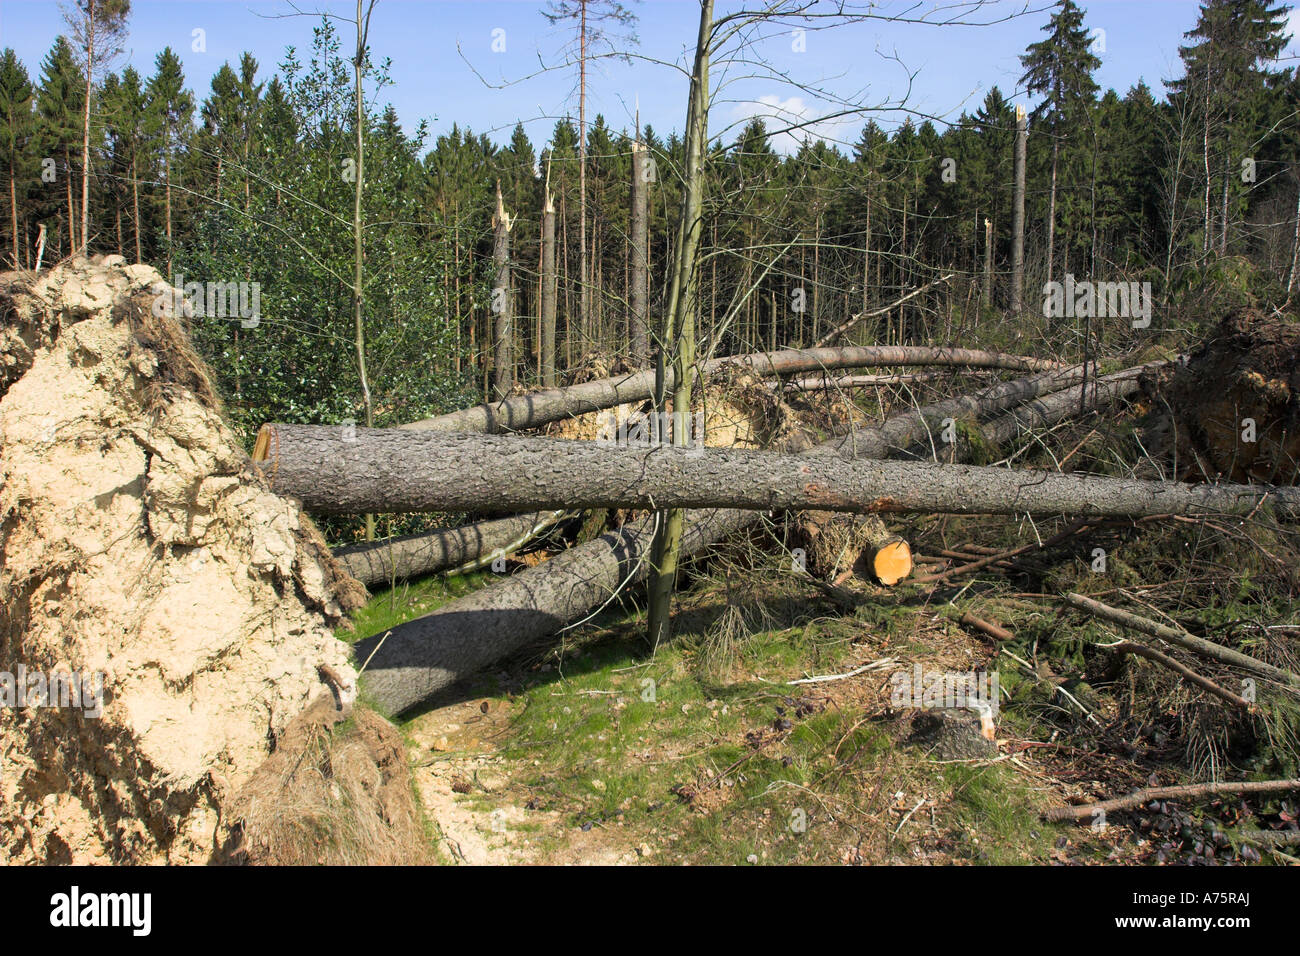 Fallen trees uprooted during gale force winds in the Oberberg Region of North-Rhine Westfalia, Germany Stock Photo